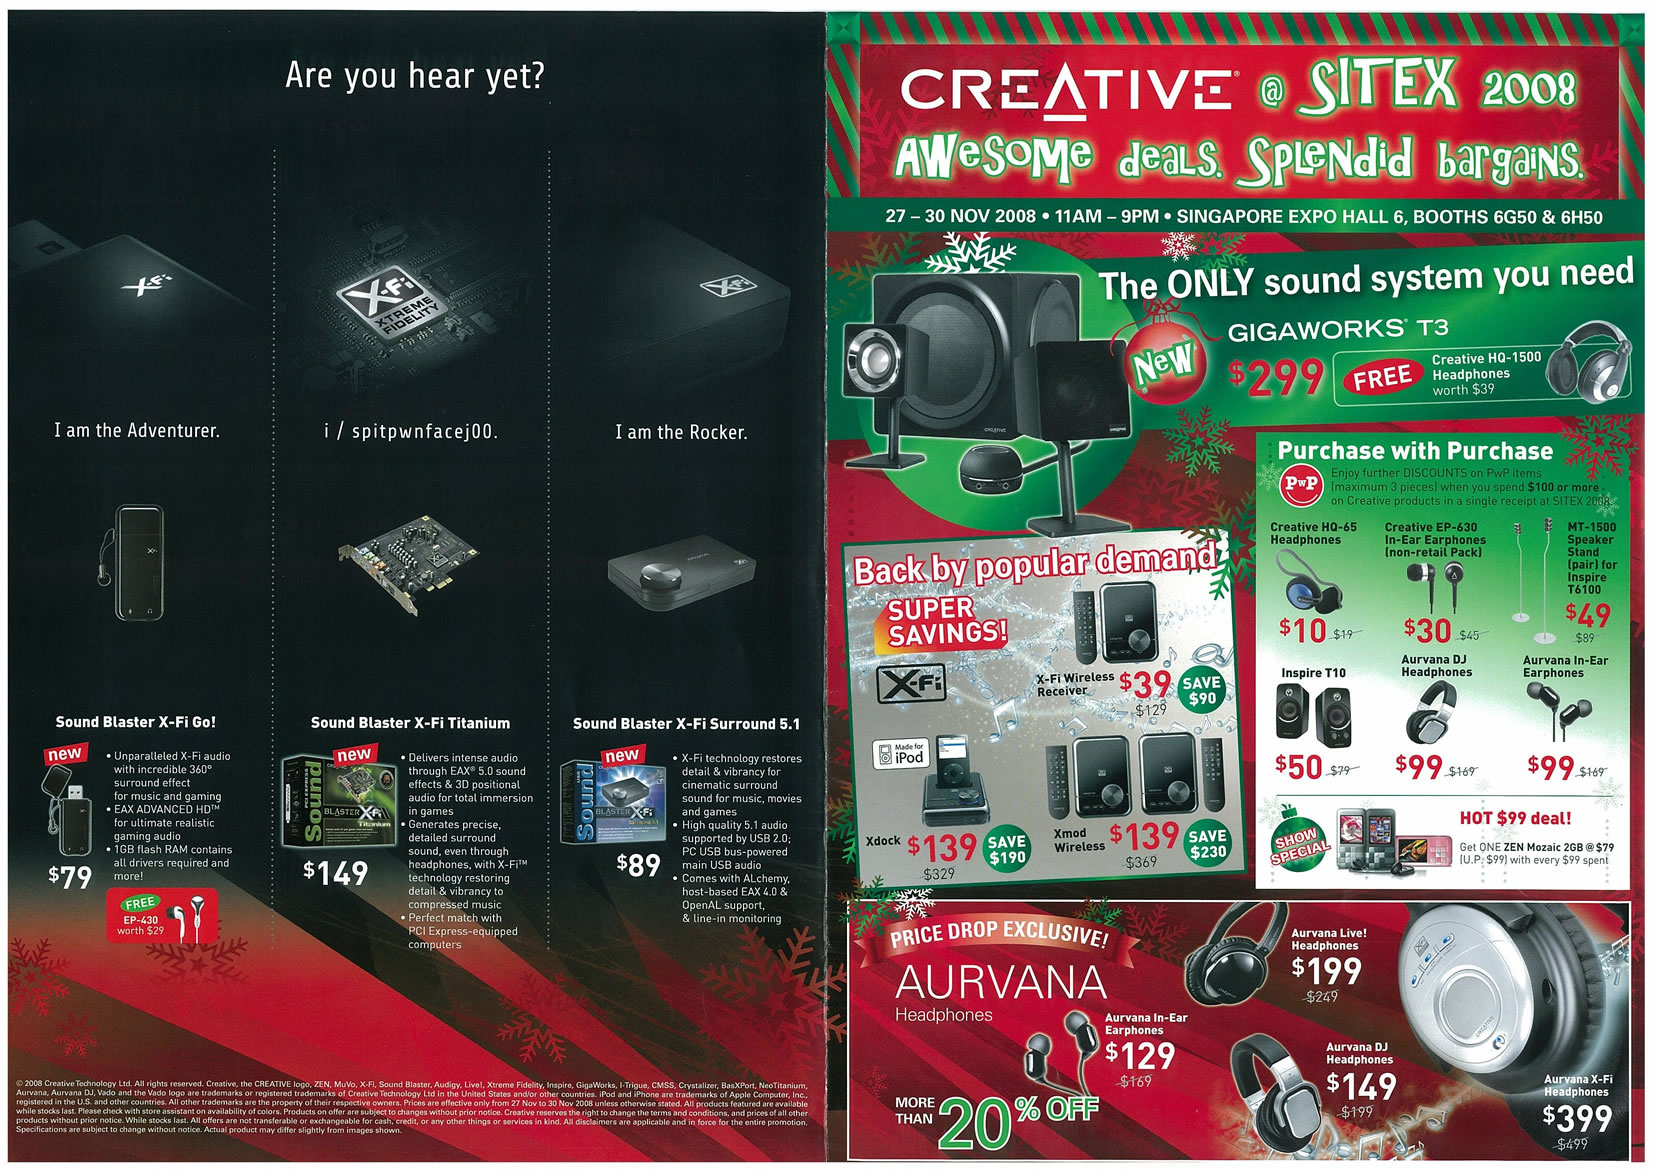 Sitex 2008 price list image brochure of Creative 01 Page 1 - Vr-zone Tclong